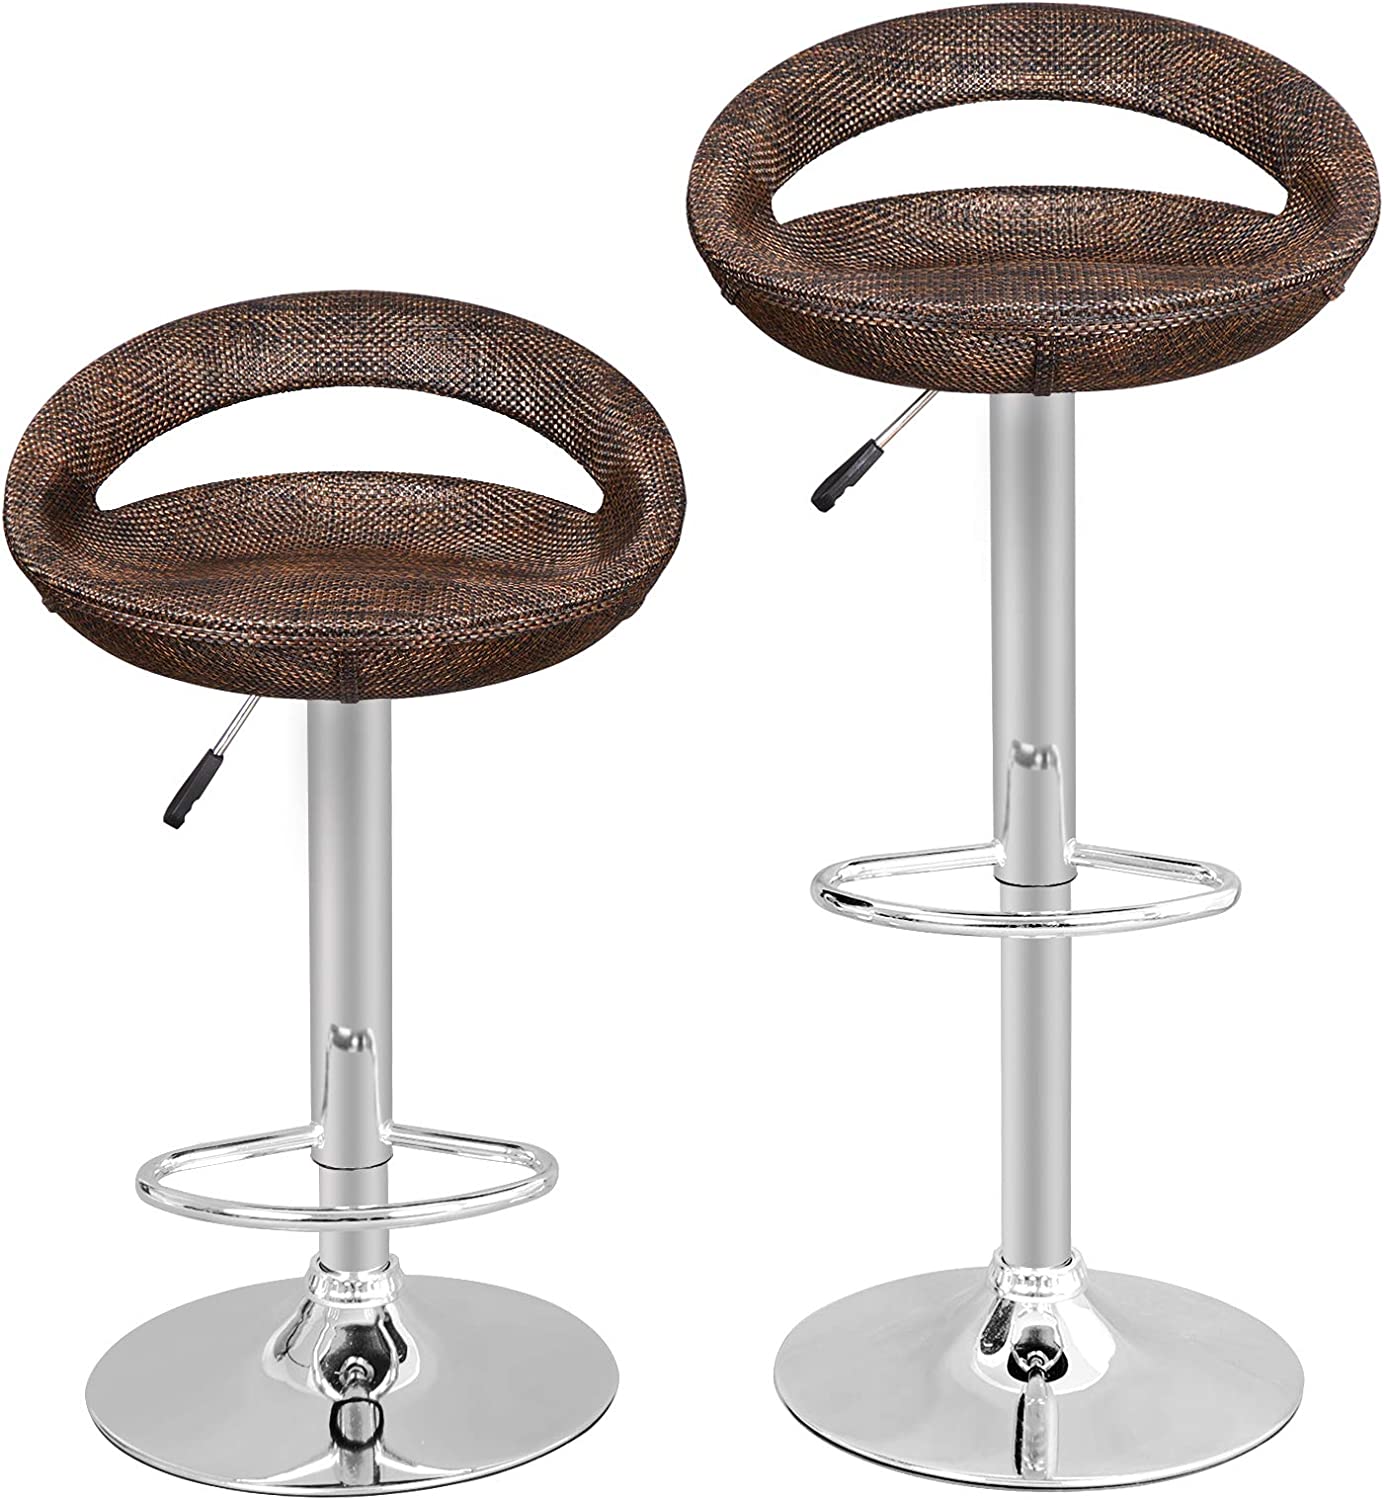 Set of 2 Adjustable Bar Stools, Pub Swivel Barstool Chairs with Back, Pub Kitchen Counter Height Modern Patio Barstool